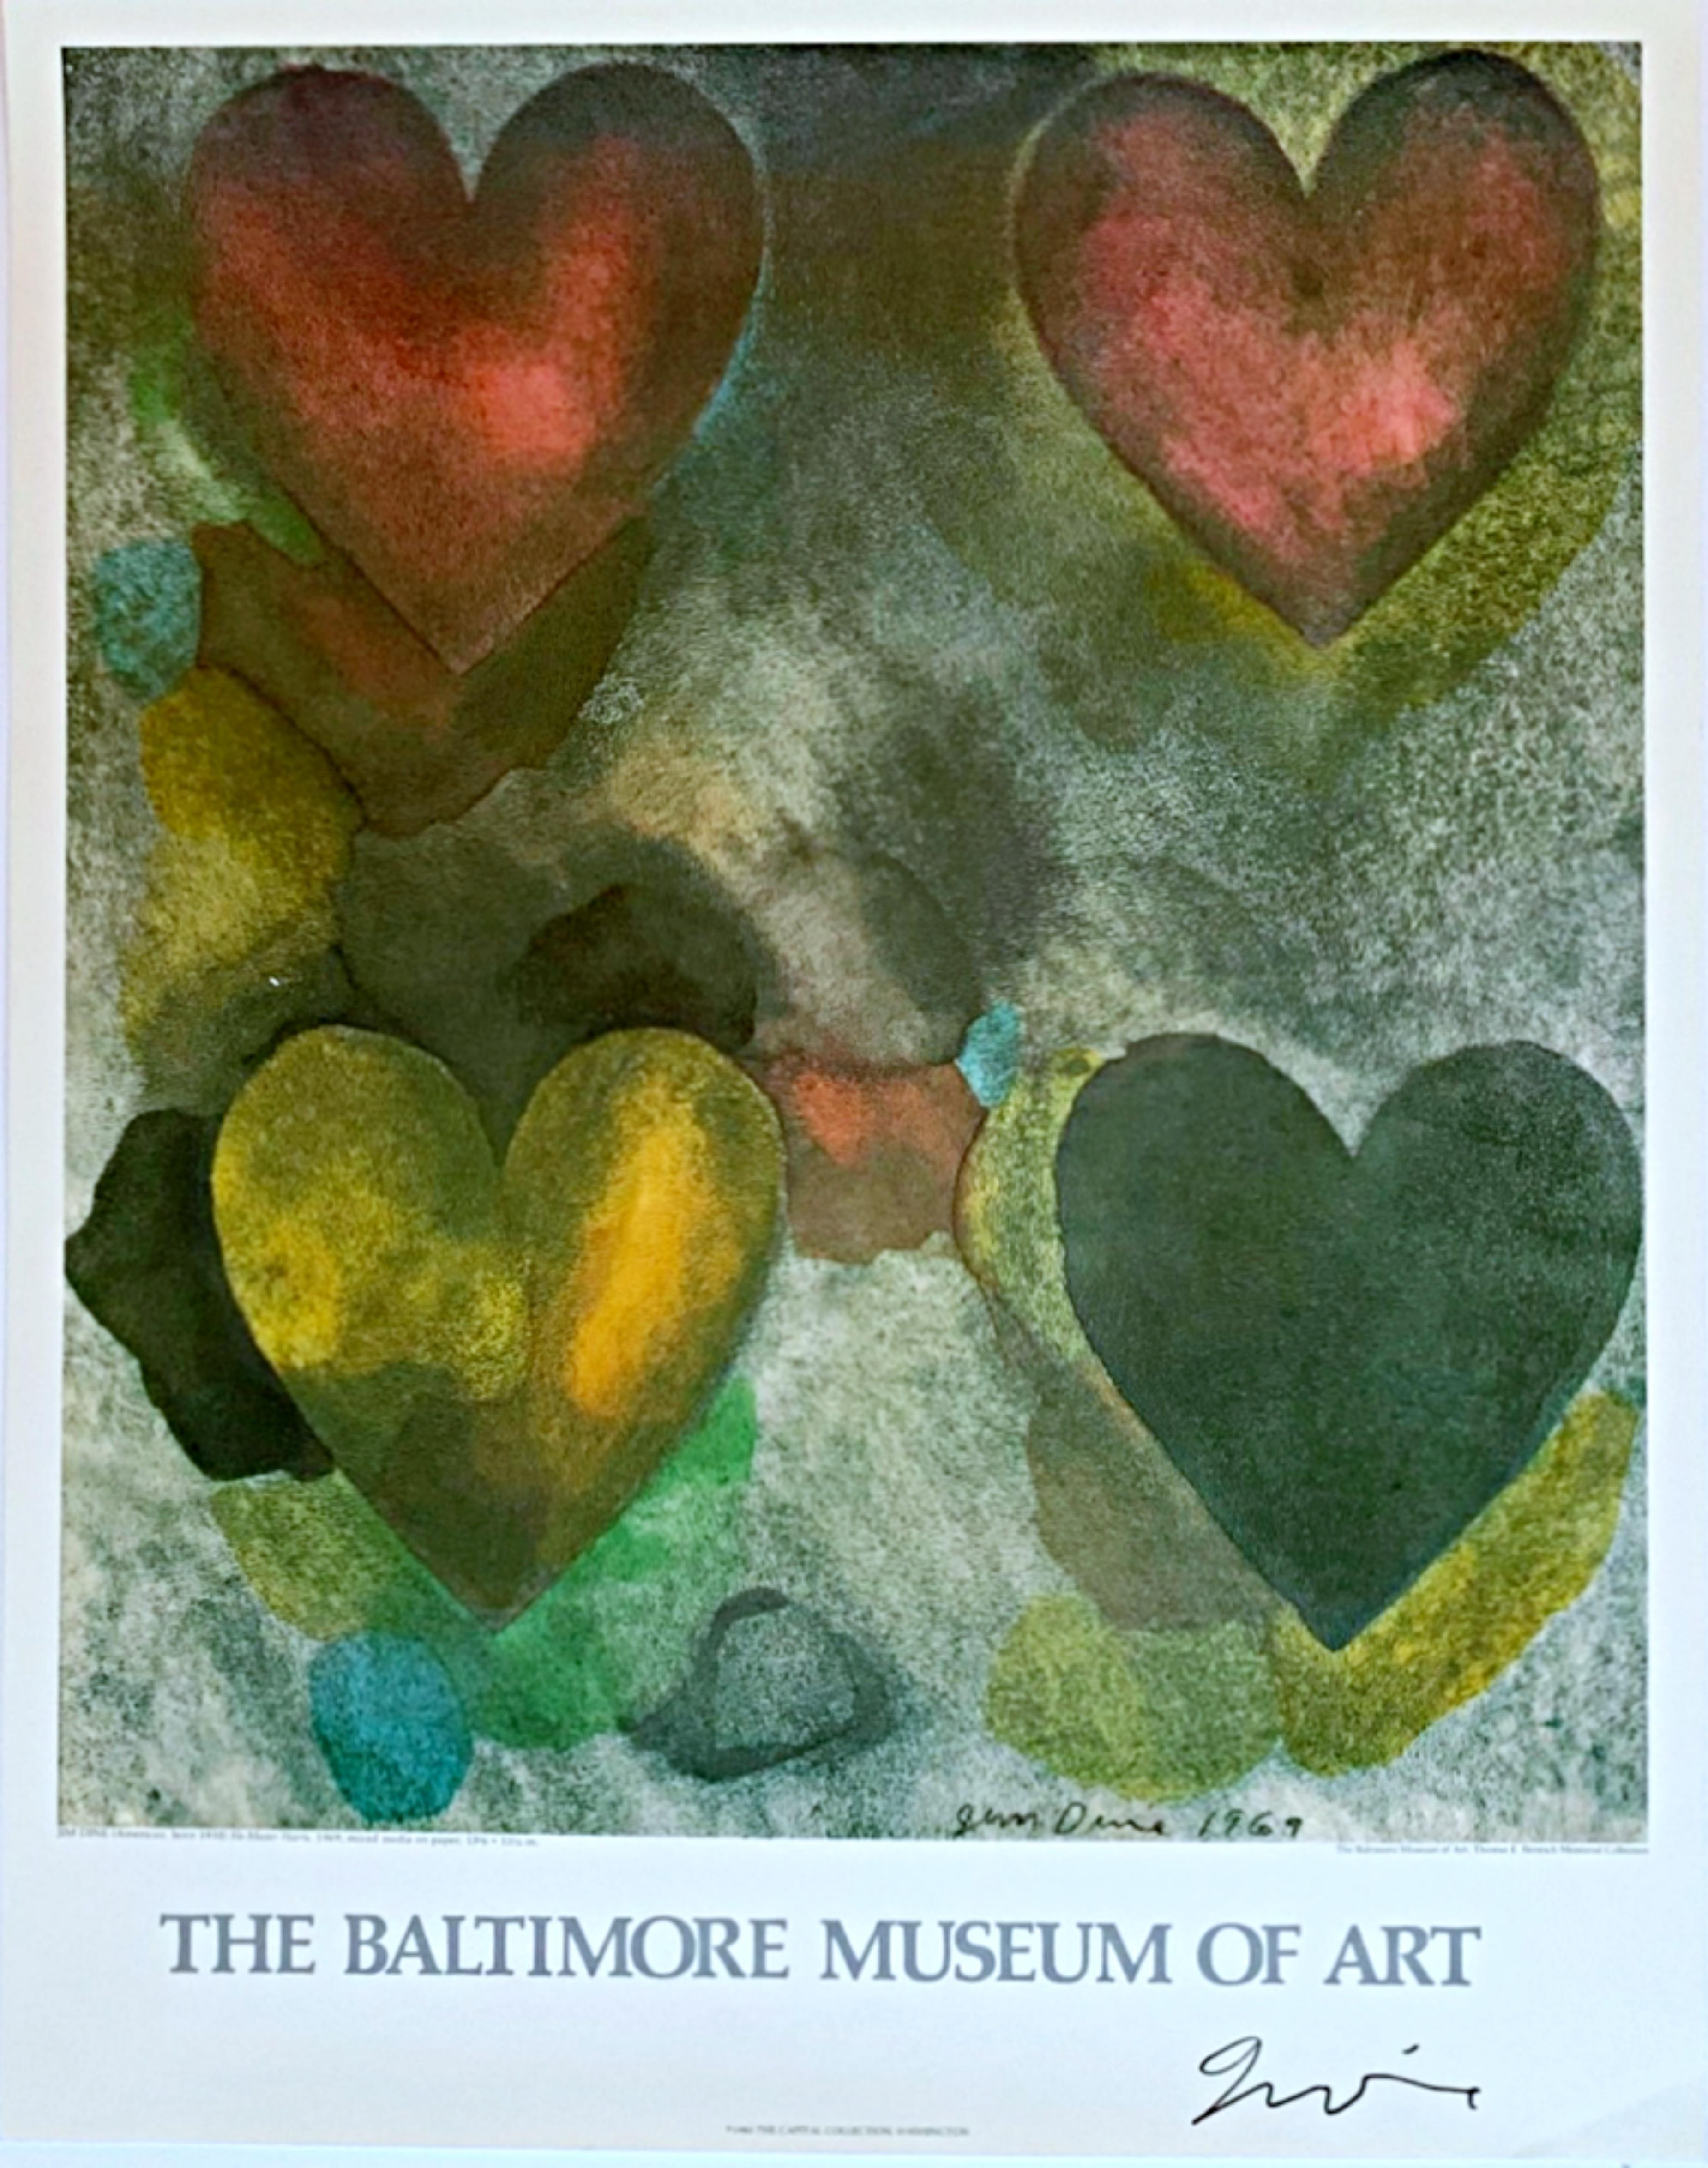 Four Hearts, rare poster, The Baltimore Museum of Art  (Hand Signed by Jim Dine)